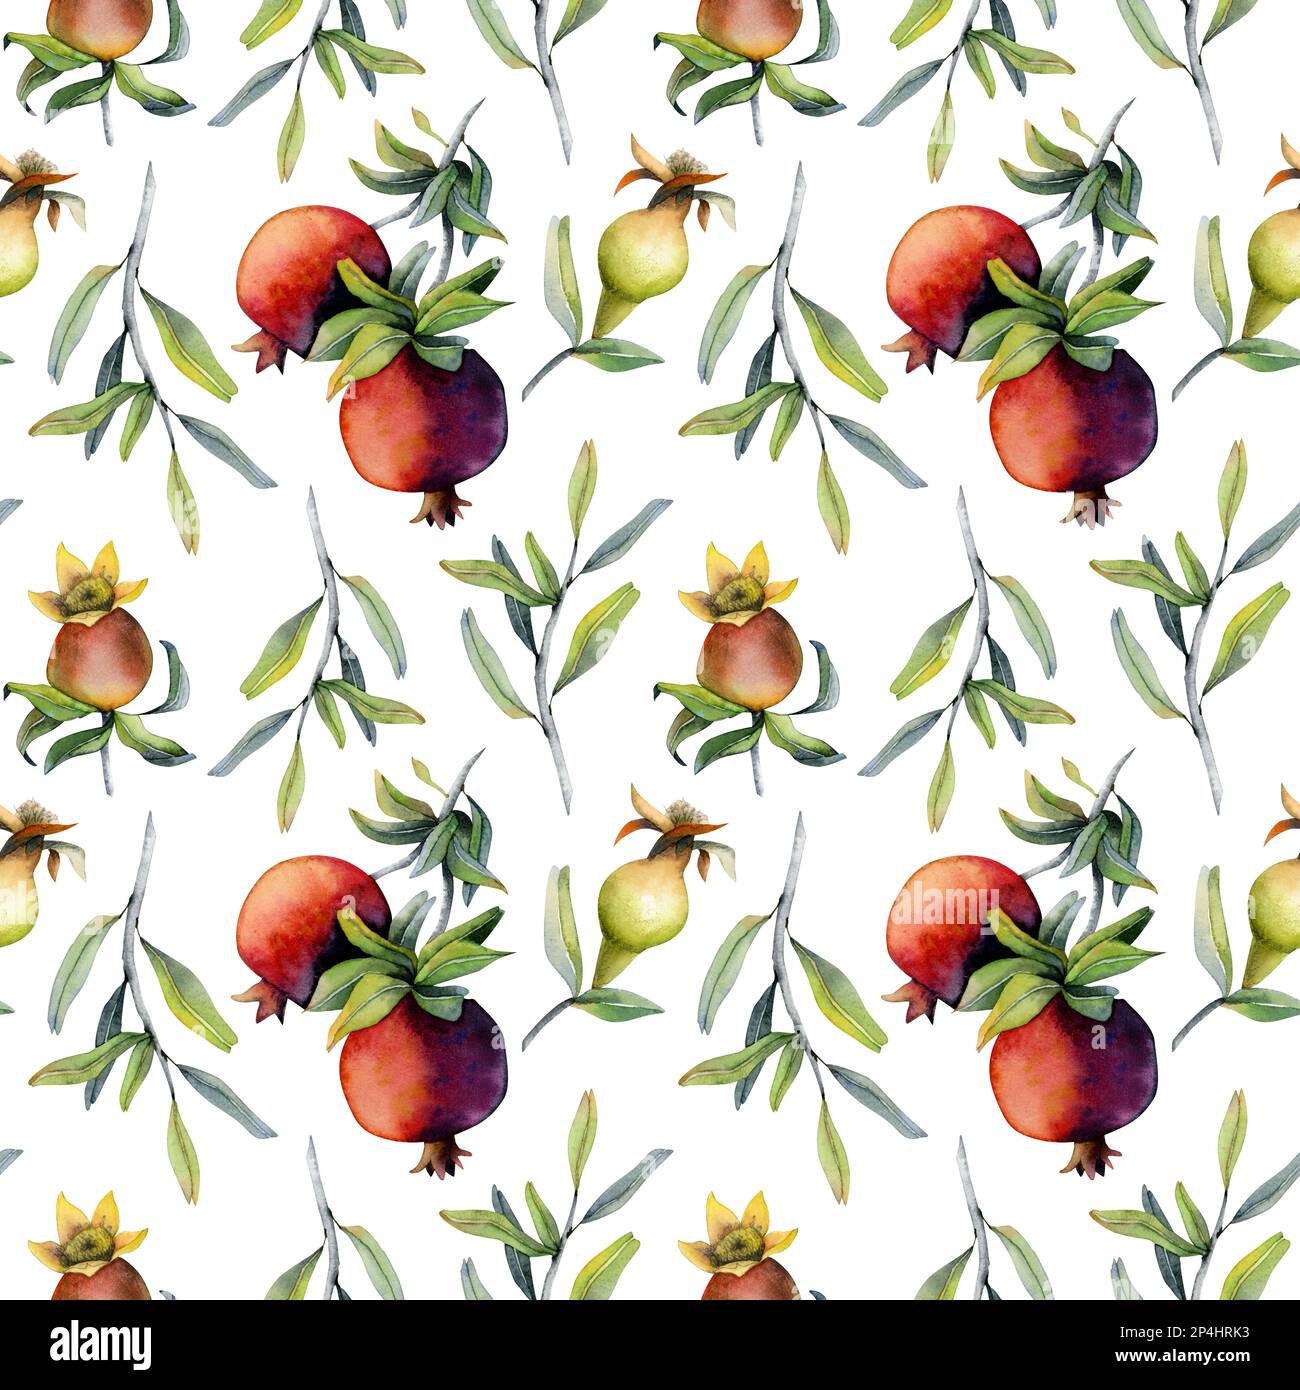 Watercolor seamless pattern with pomegranates fruits on branch with leaves on white background for cosmetics wrapping and Jewish Rosh Hashanah designs Stock Photo